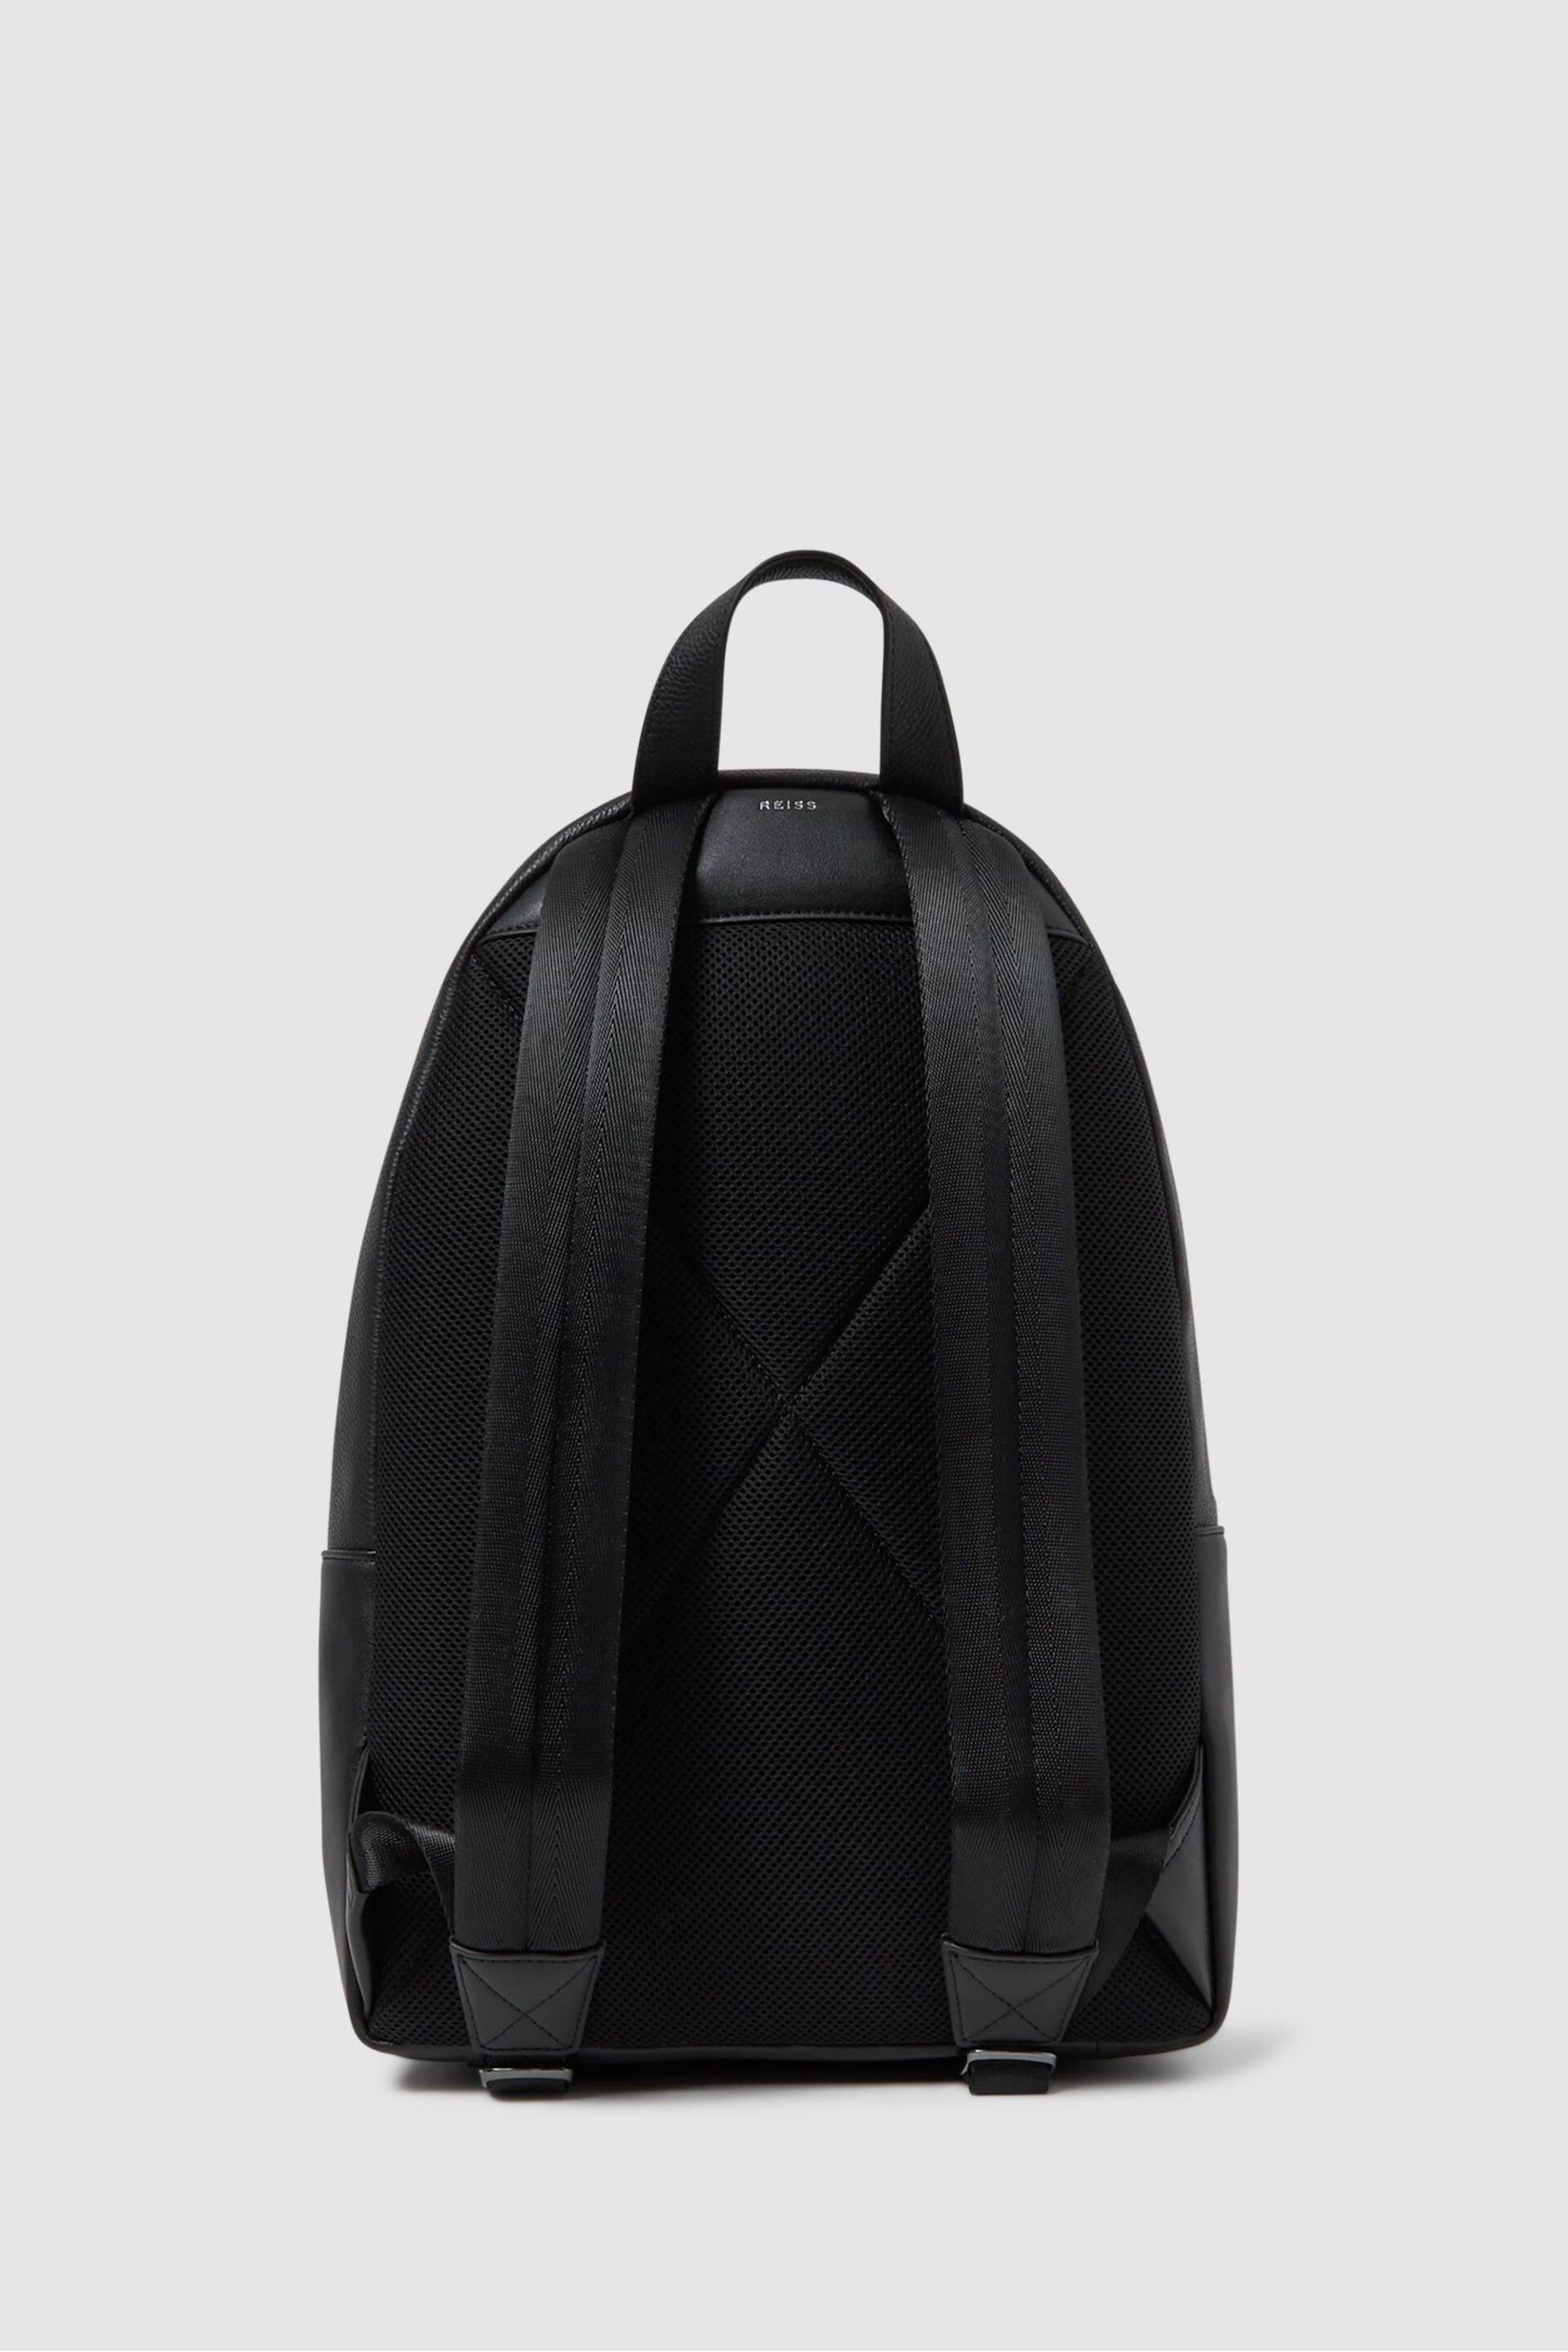 Reiss Black Drew Leather Zipped Backpack - Image 5 of 5